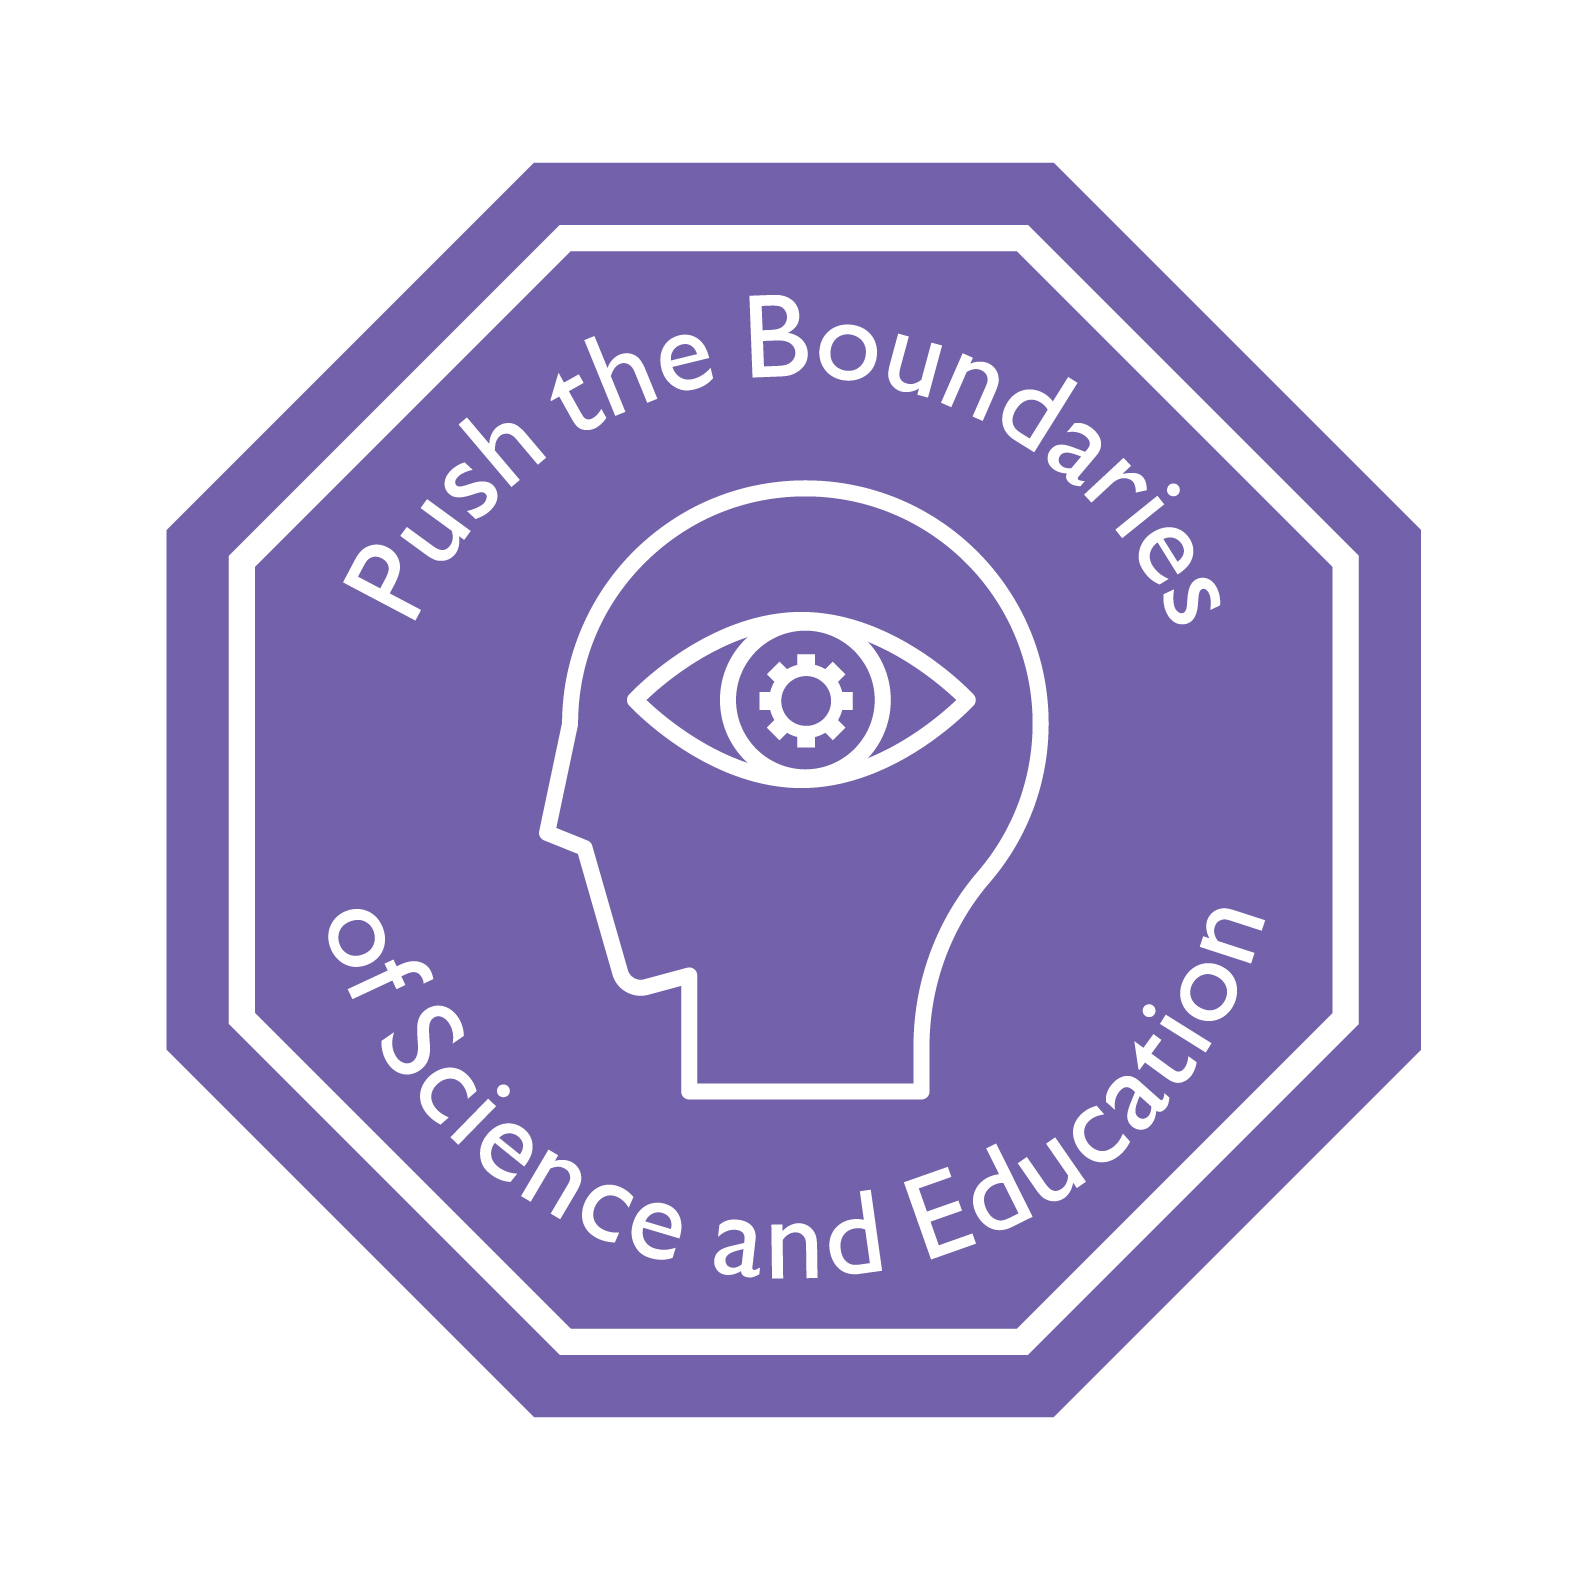 Push the Boundaries of Science and Education